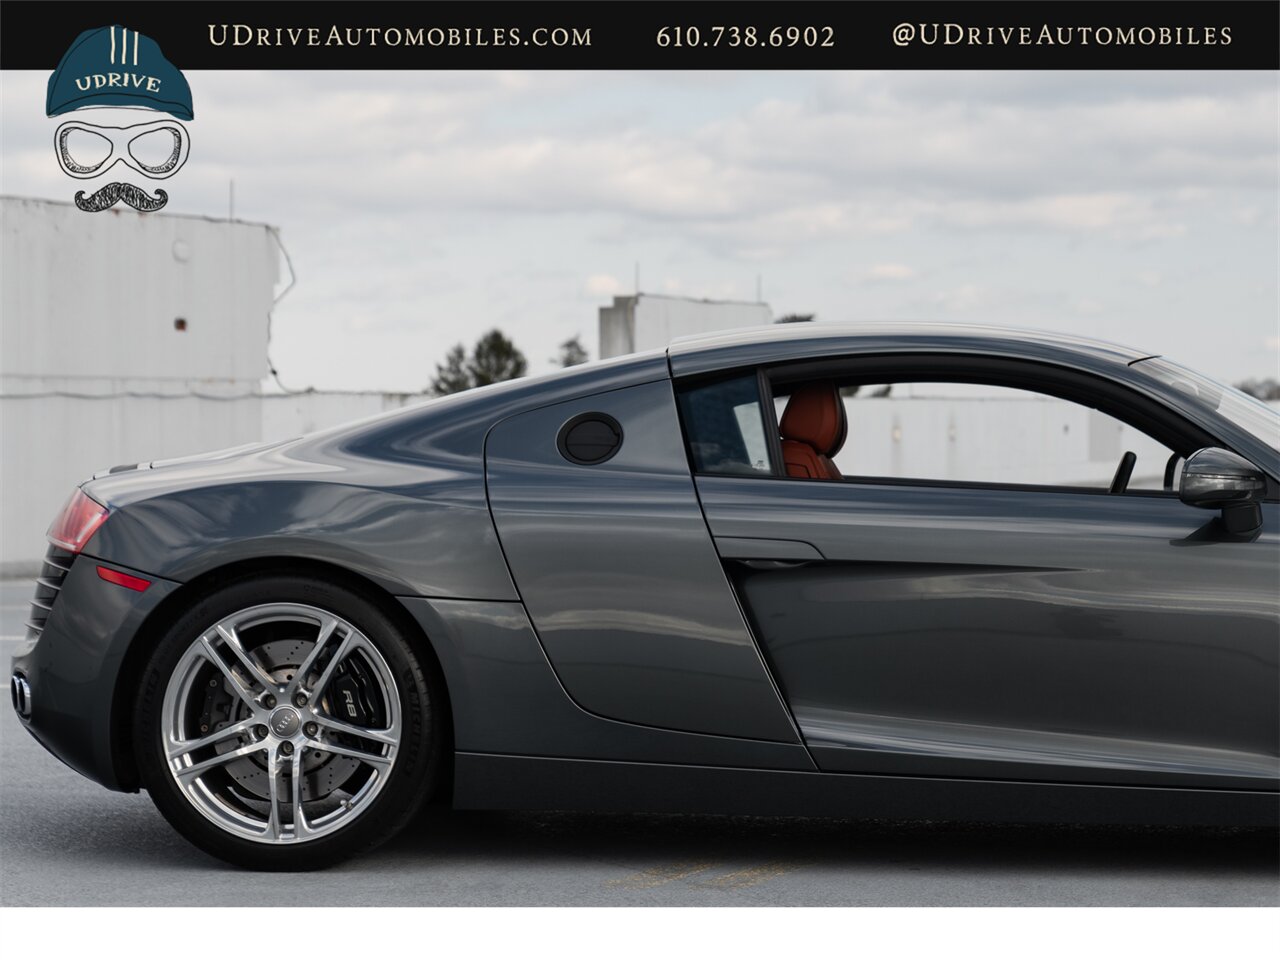 2009 Audi R8 Quattro  4.2 V8 6 Speed Manual 15k Miles - Photo 20 - West Chester, PA 19382